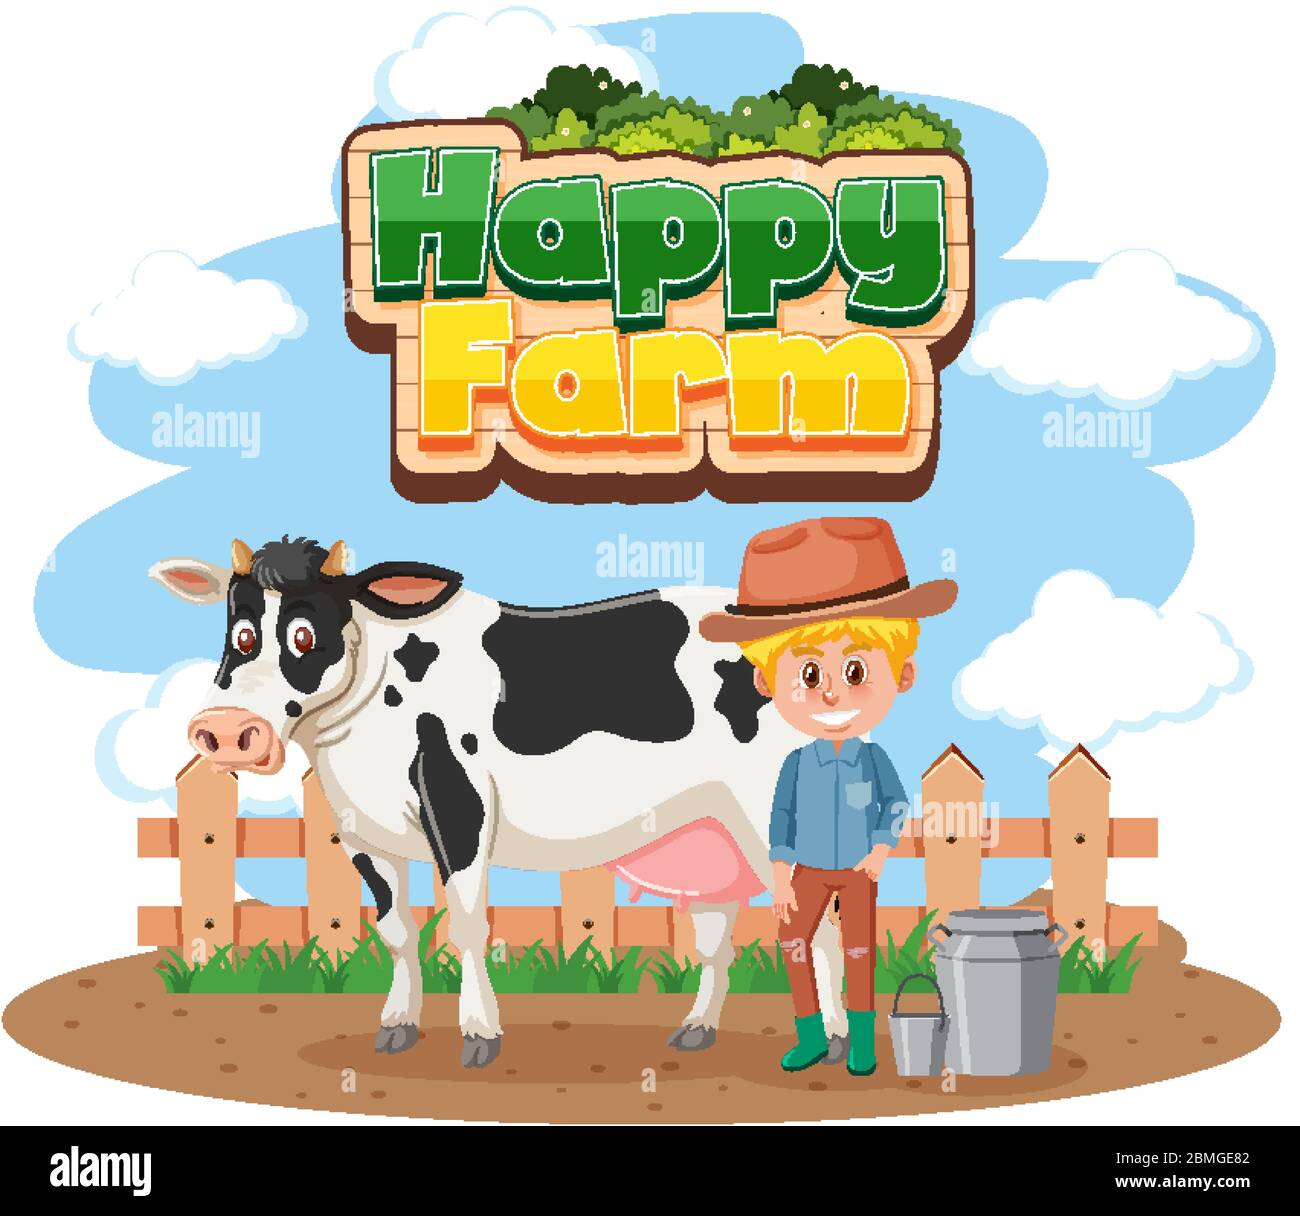 Happy cow illustration while the farmer milking Edible Birthday